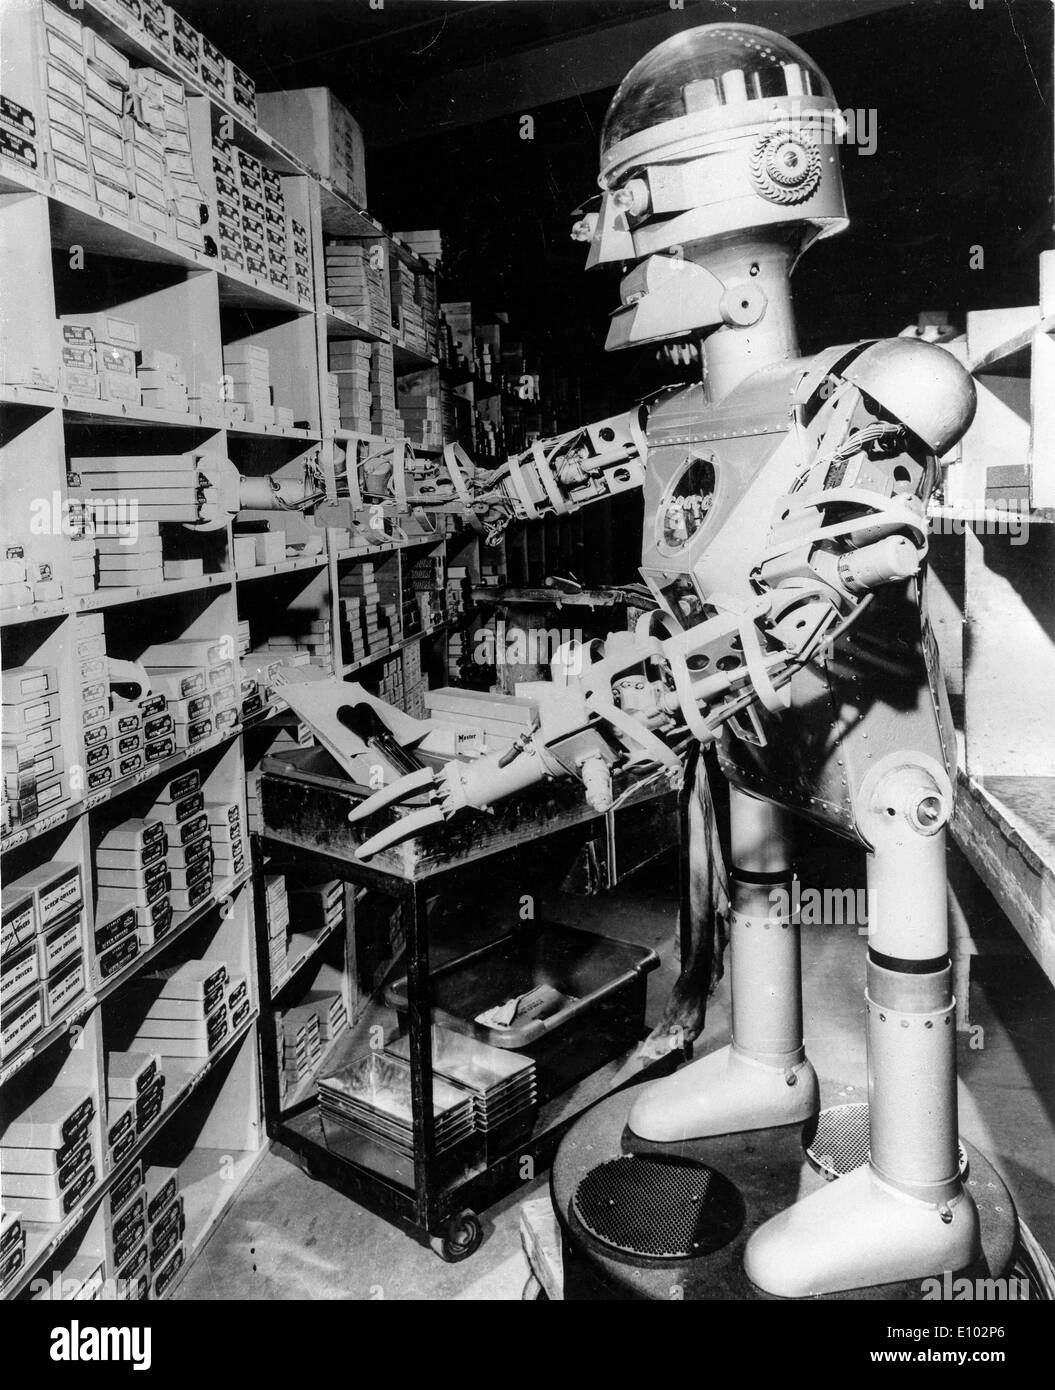 old-fashioned-robot-filing-E102P6.jpg